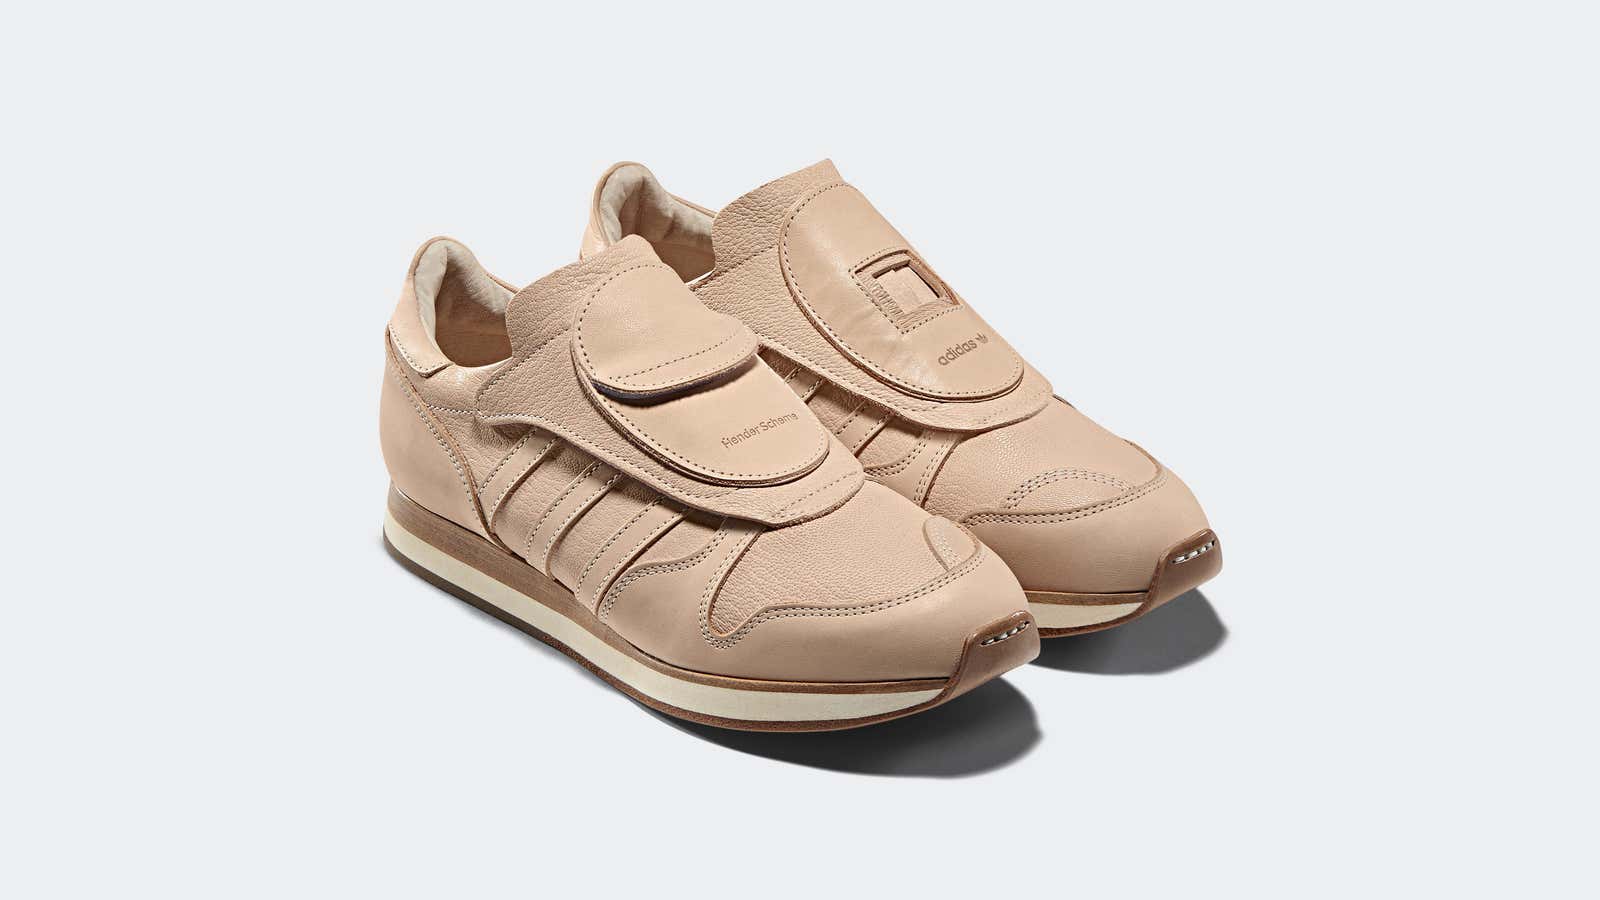 The Adidas Micropacer, remade by Hender Scheme.